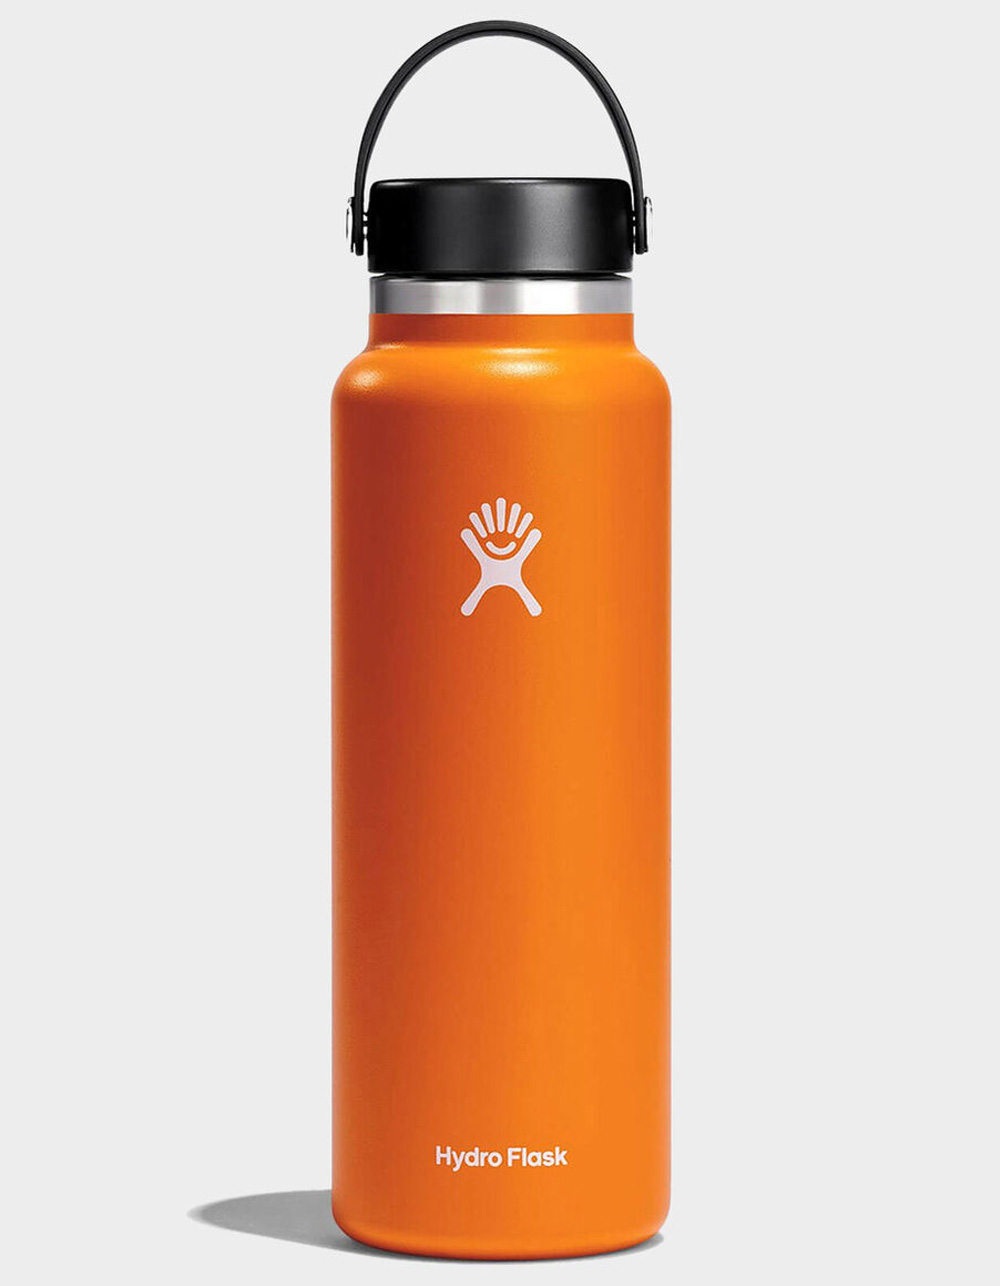 Hydro Flask 40 oz NEW limited edition Pacific Northwest Ombre Sunset with  boot